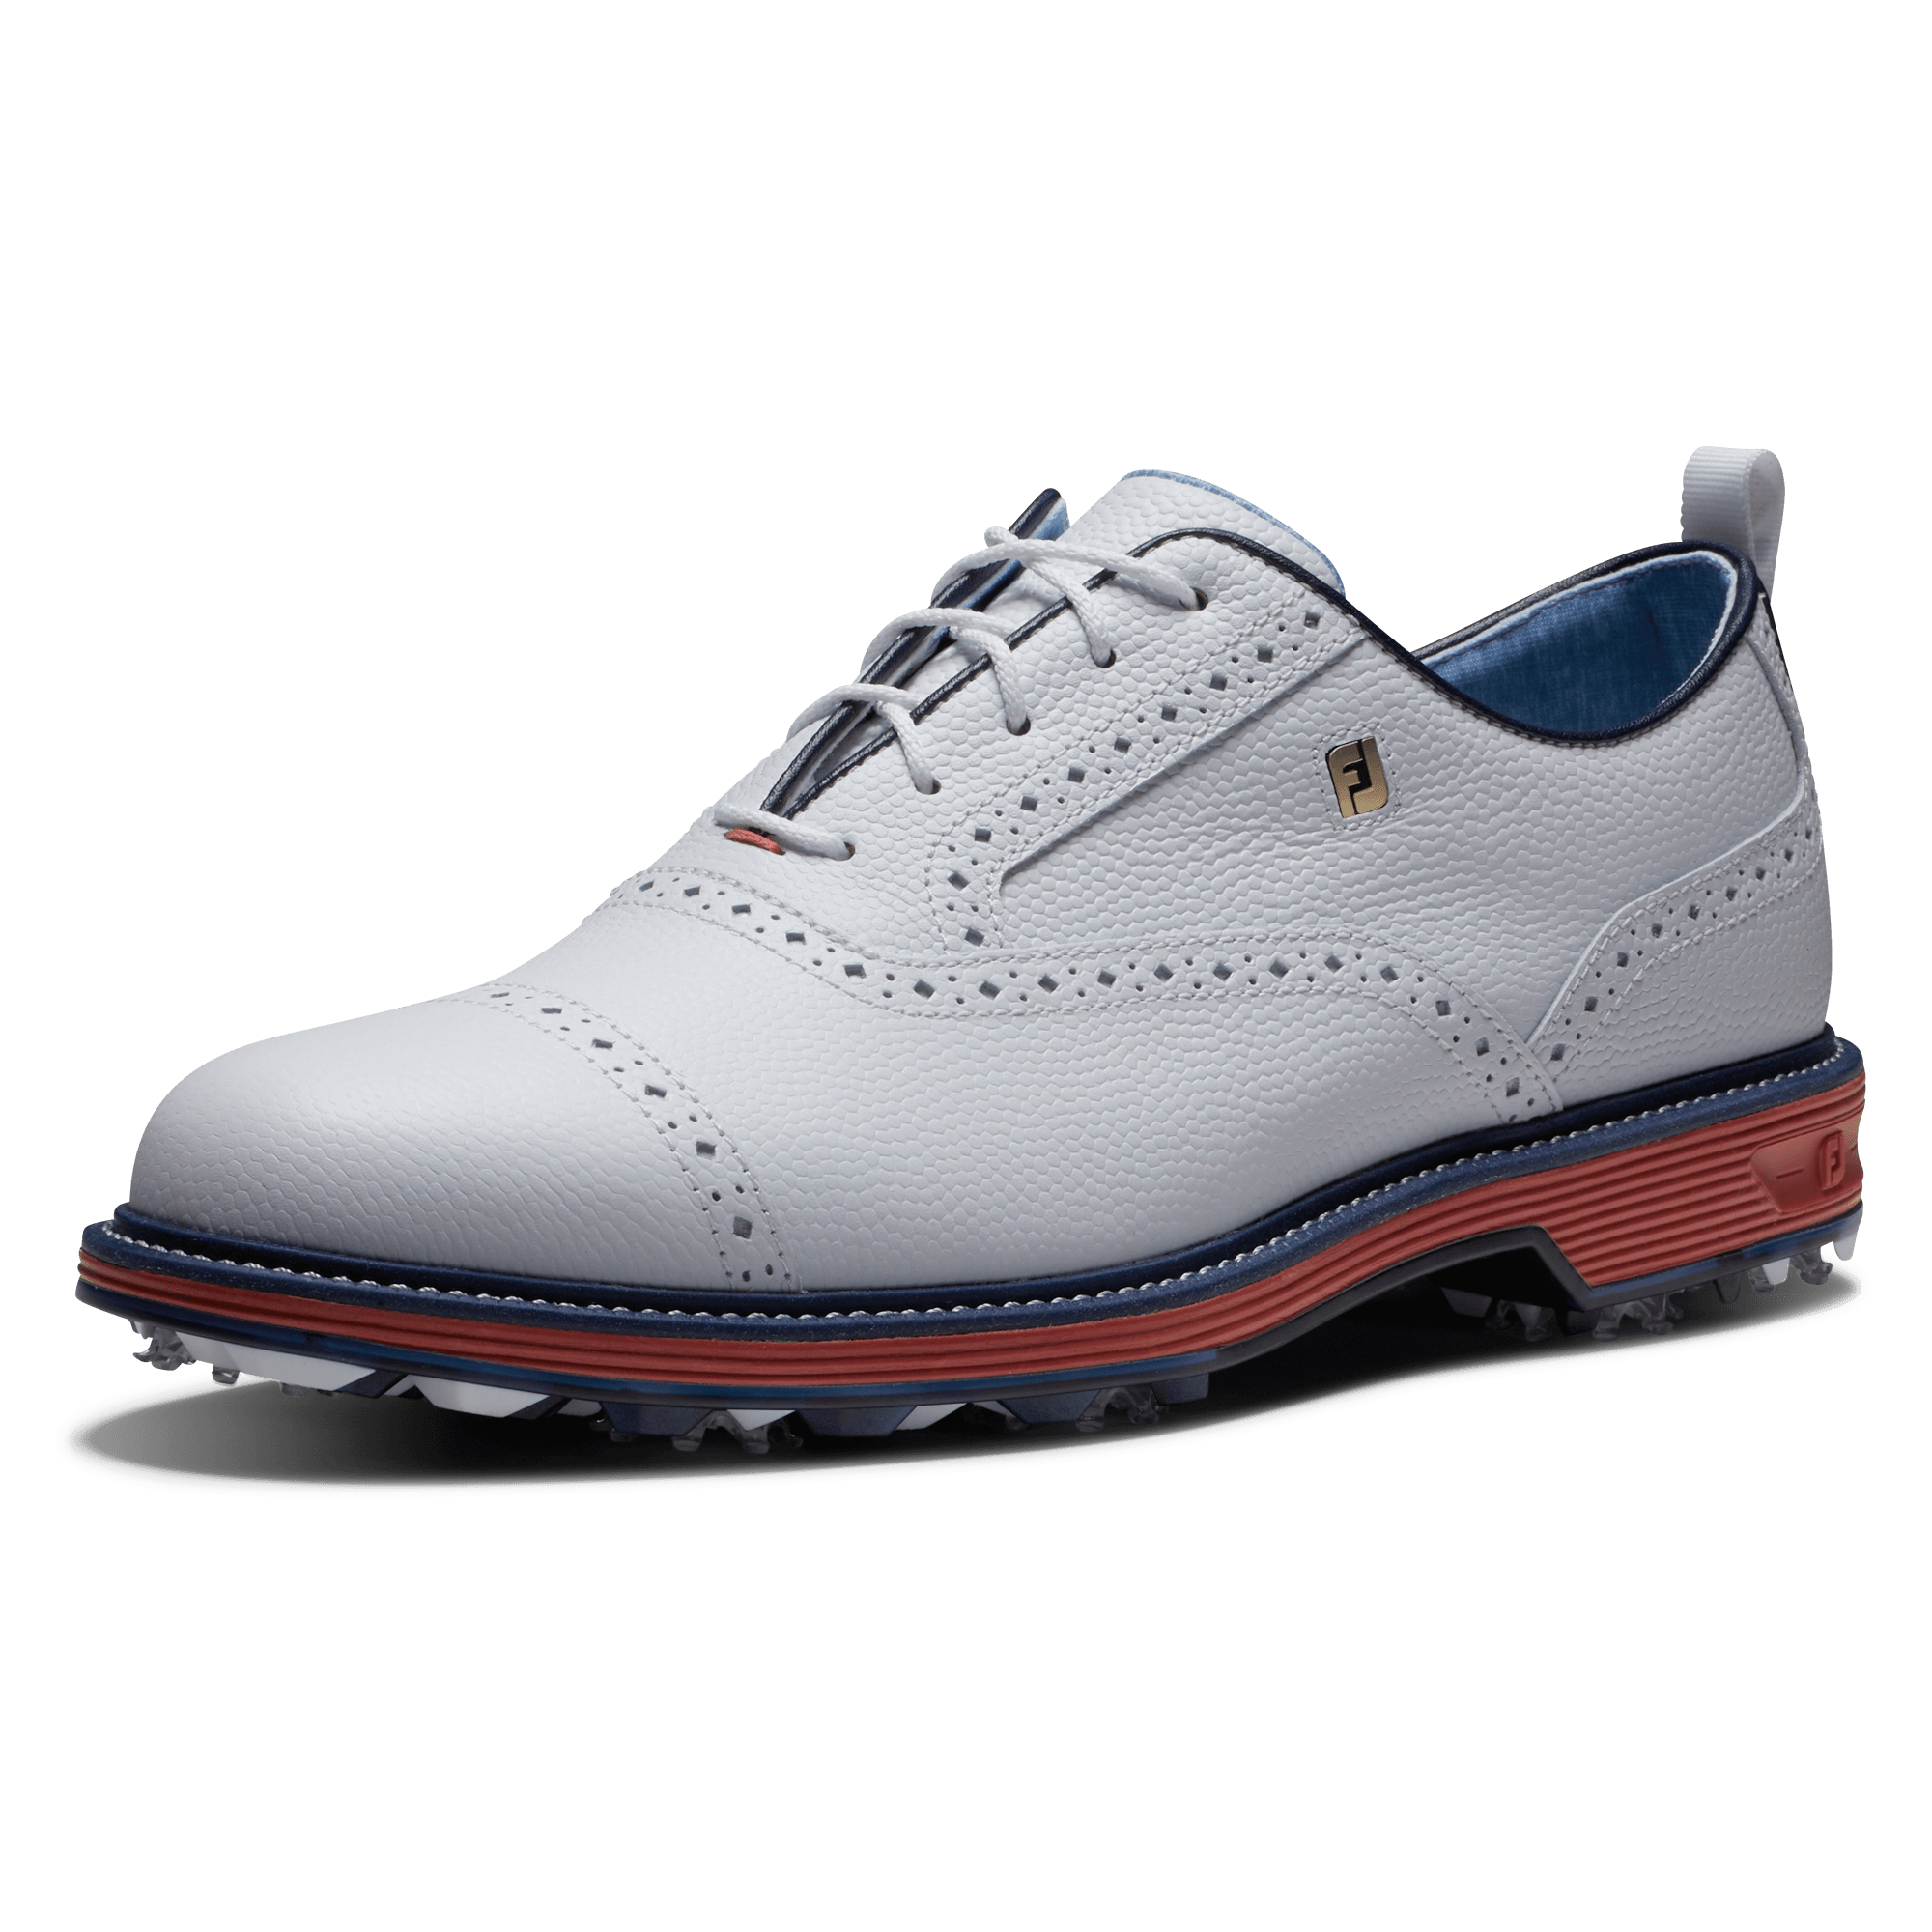 FootJoy Premiere Series Summer Classic Tarlow Golf Shoes #54312 White ...